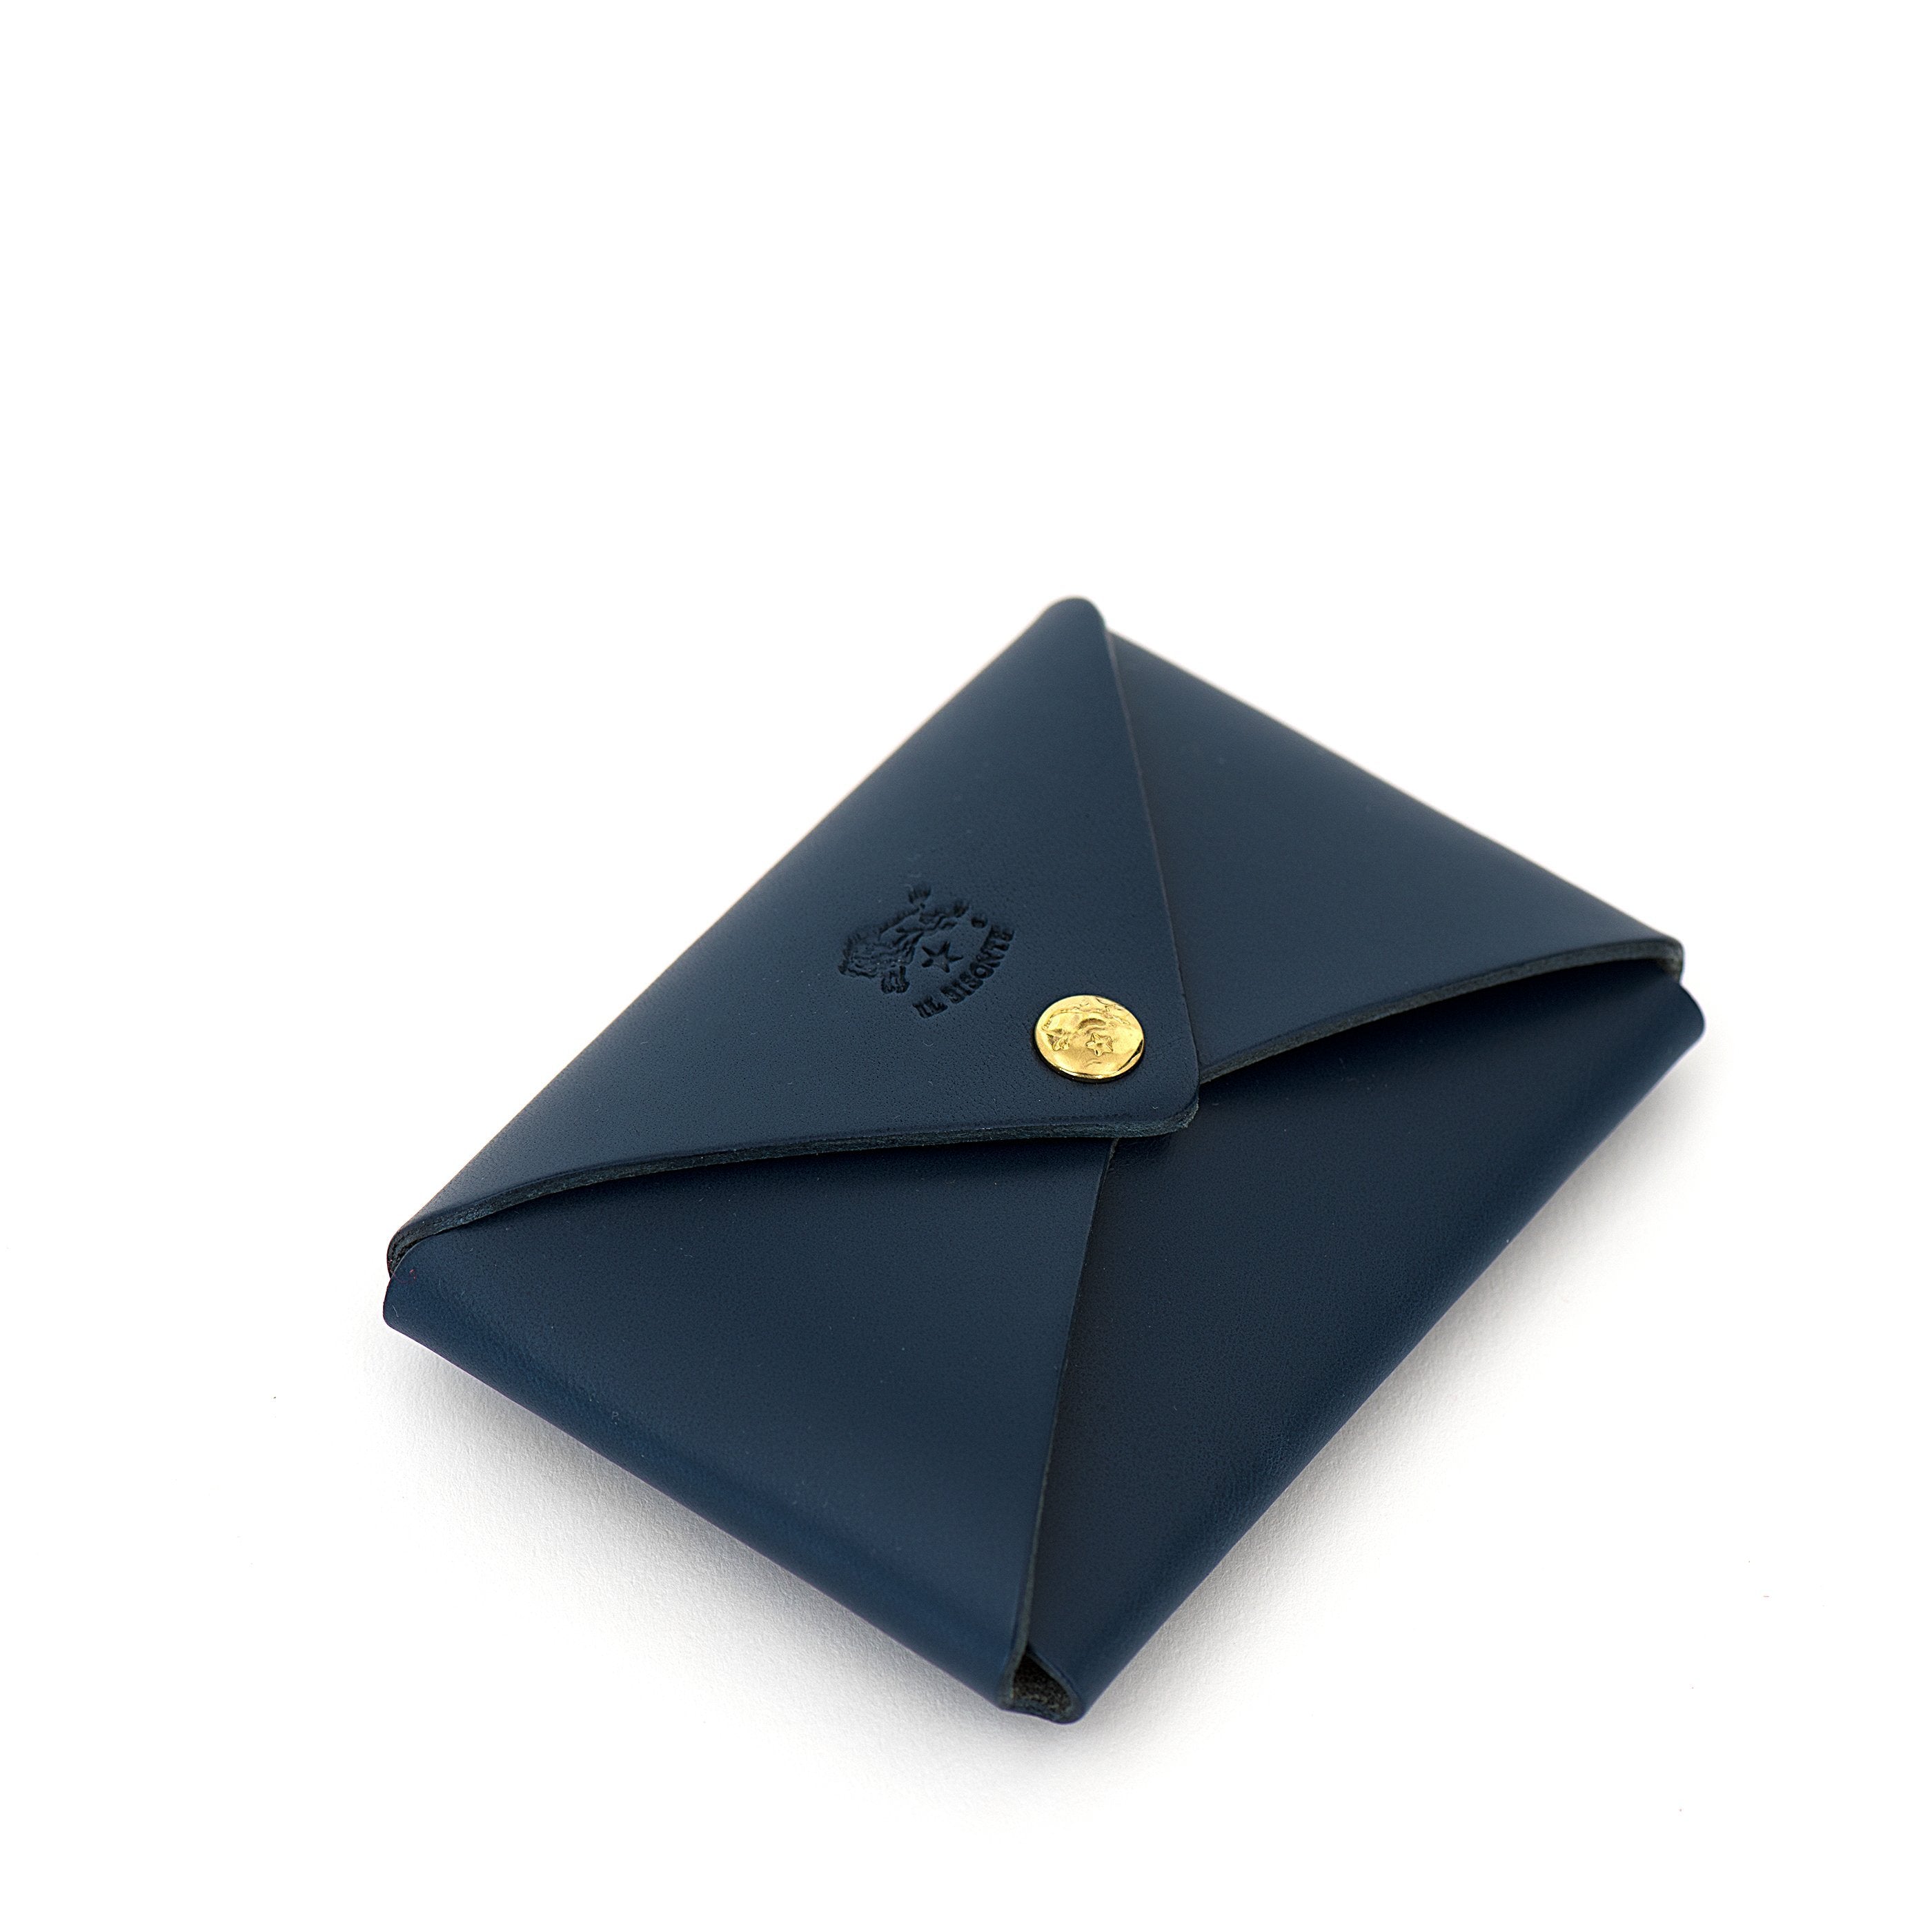 Sovana | Card case in leather color blue